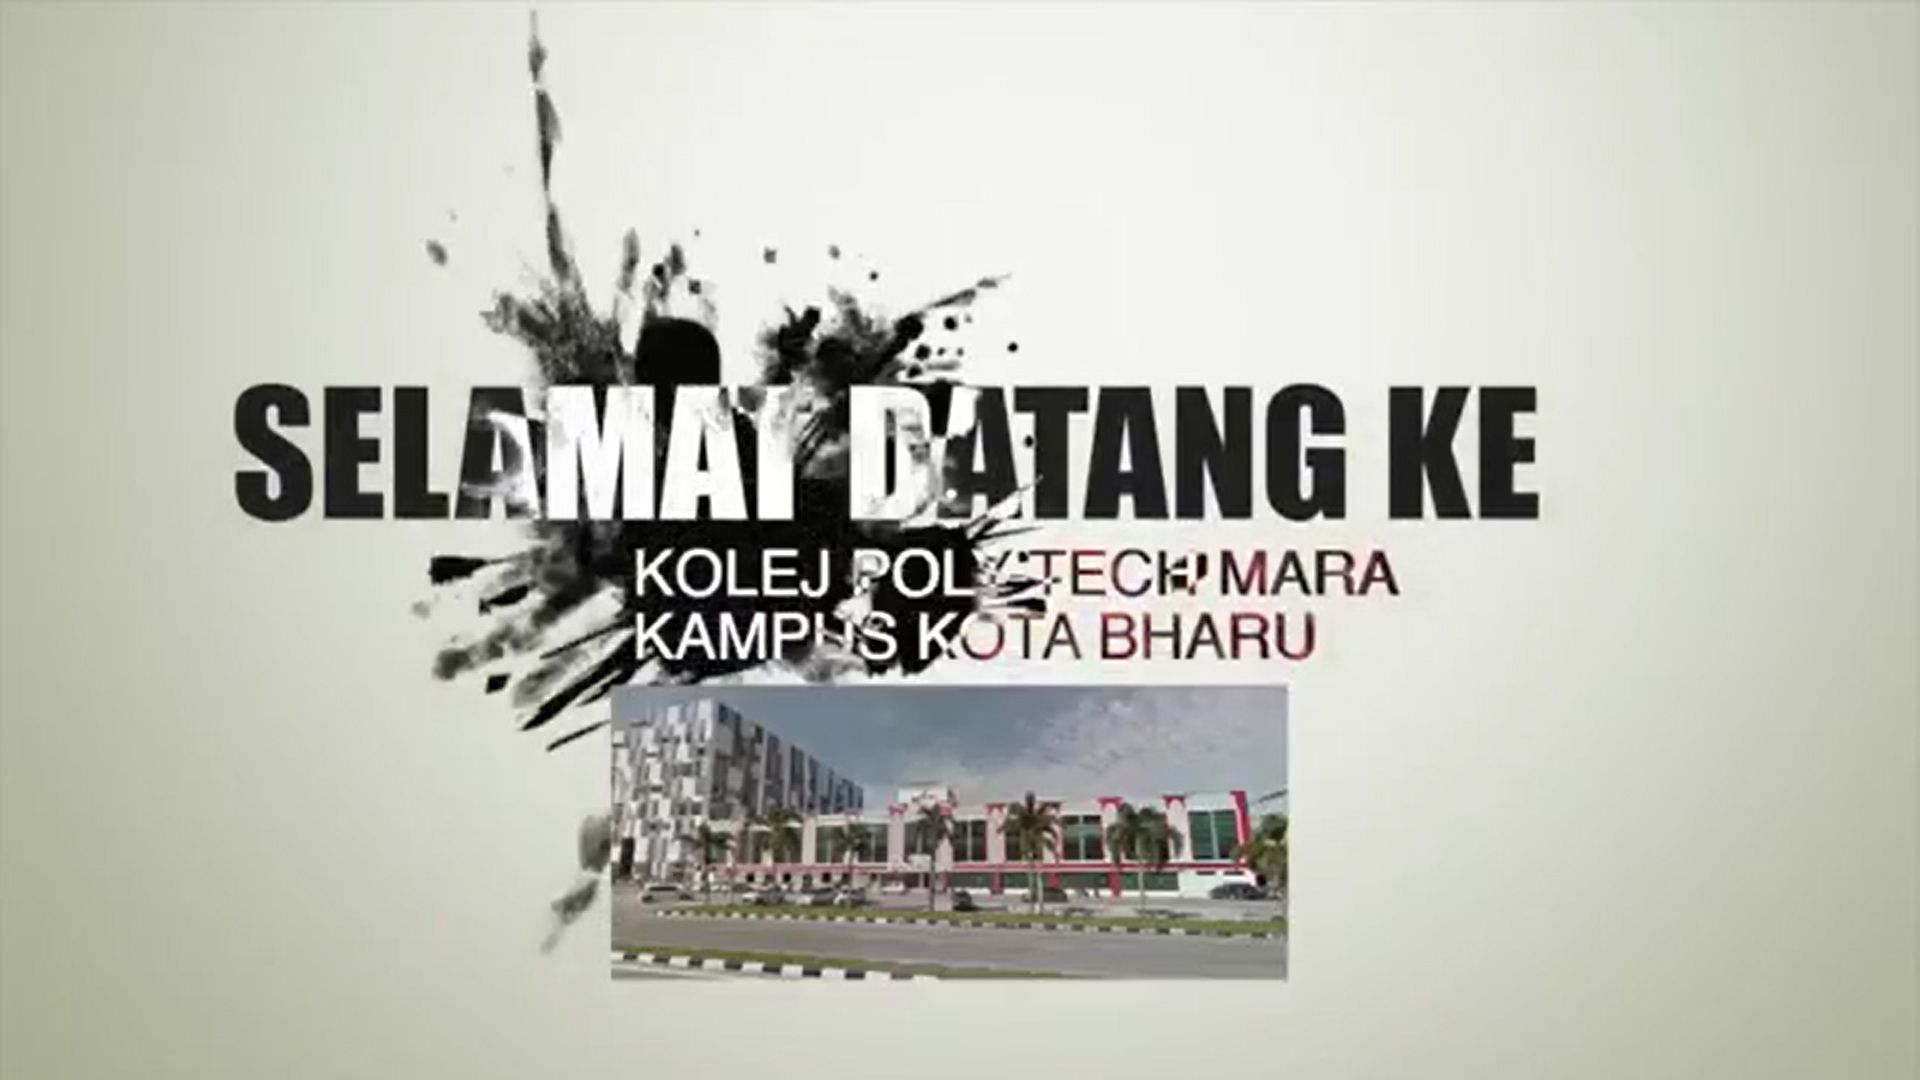 Welcome to KPTM KB